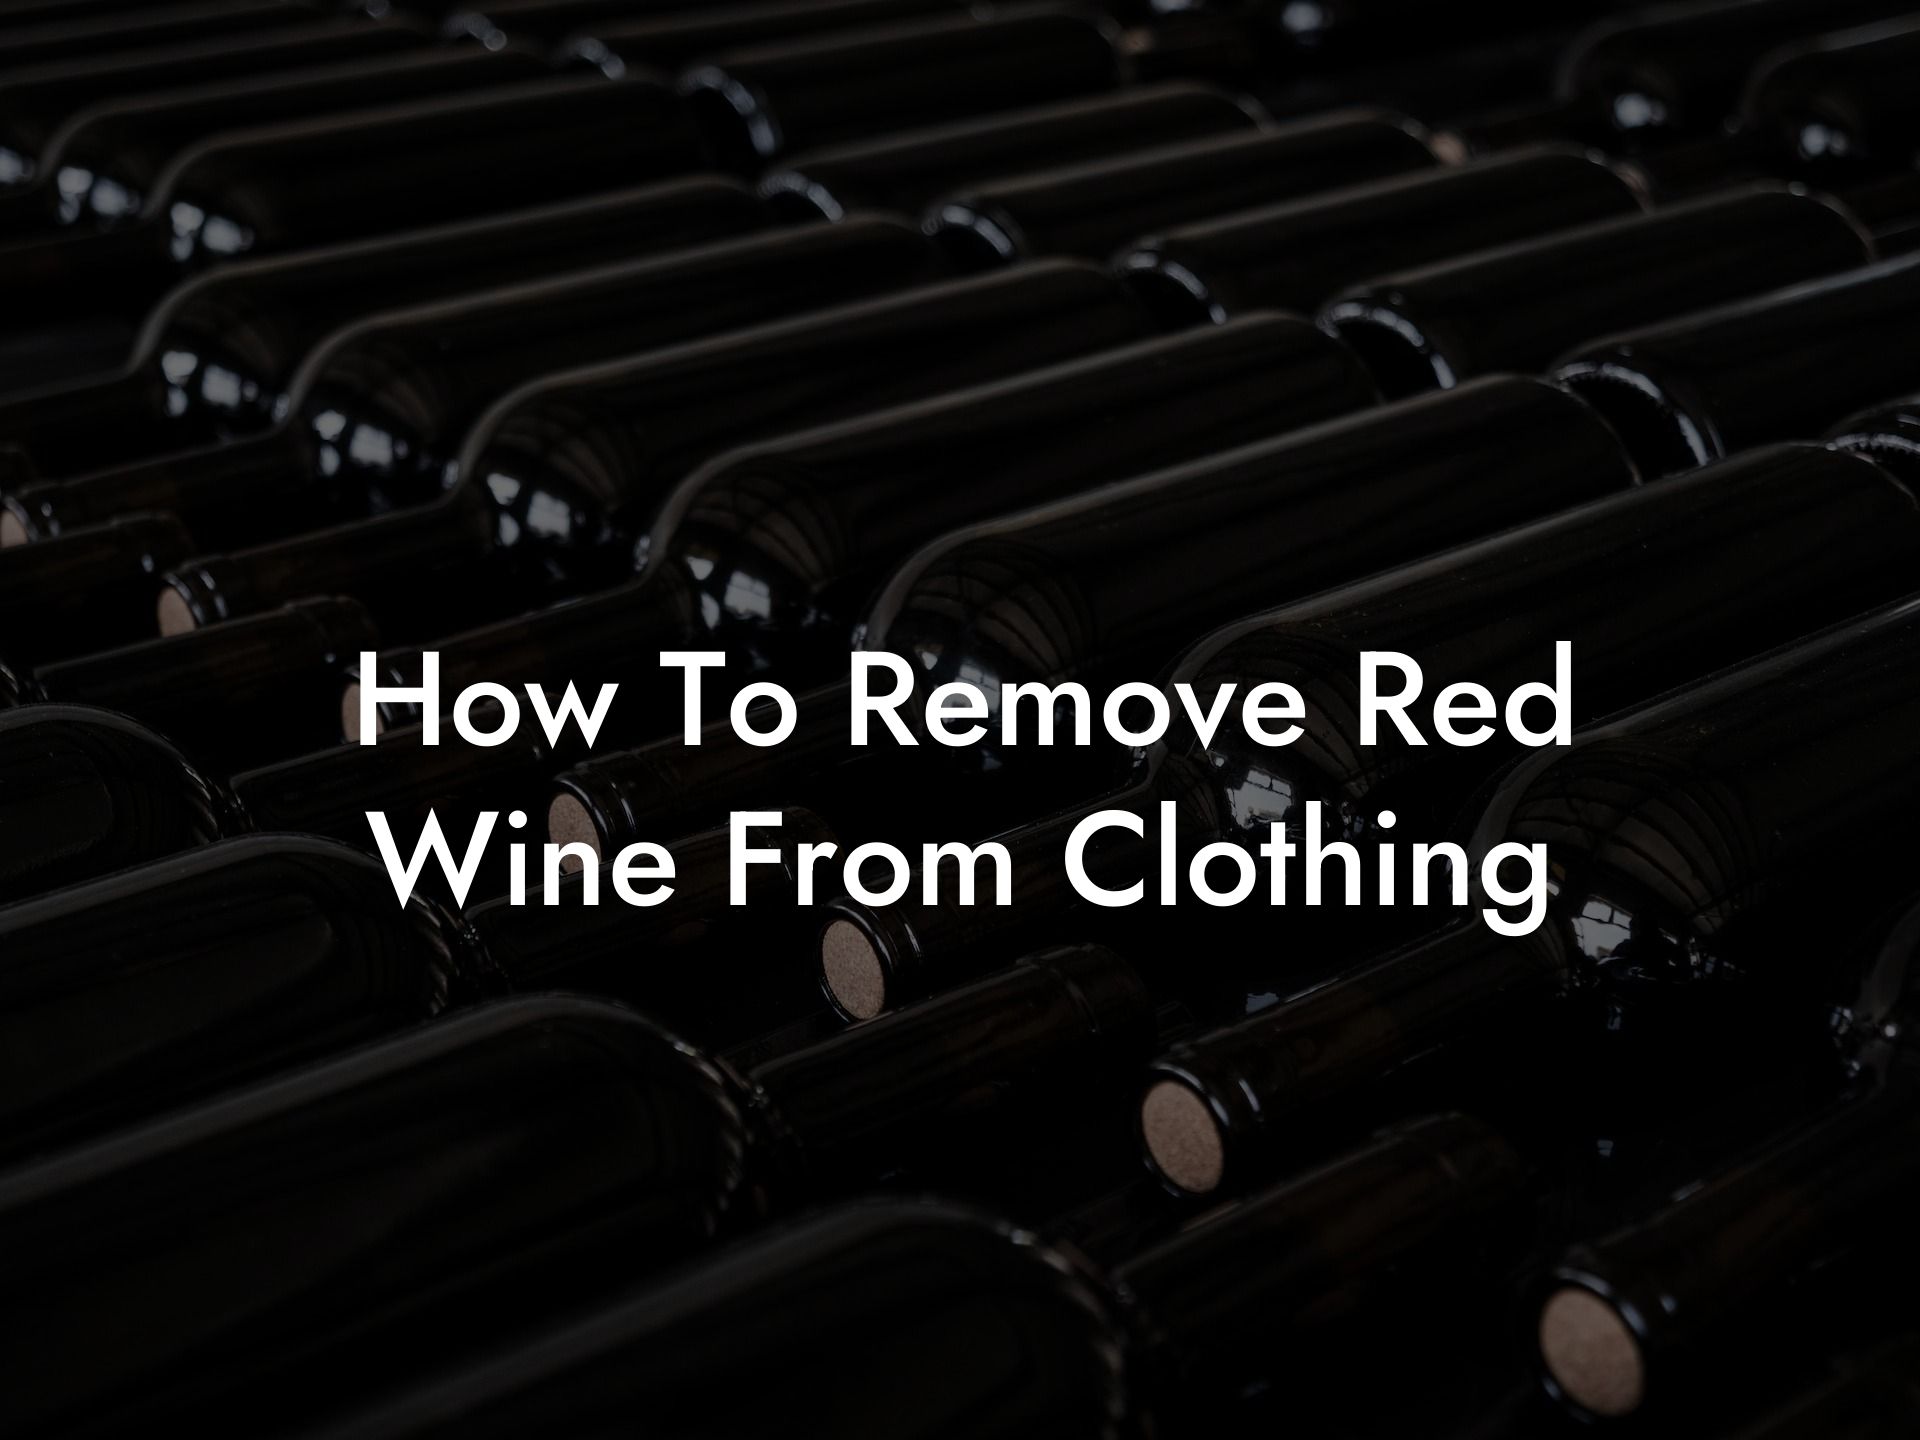 How To Remove Red Wine From Clothing